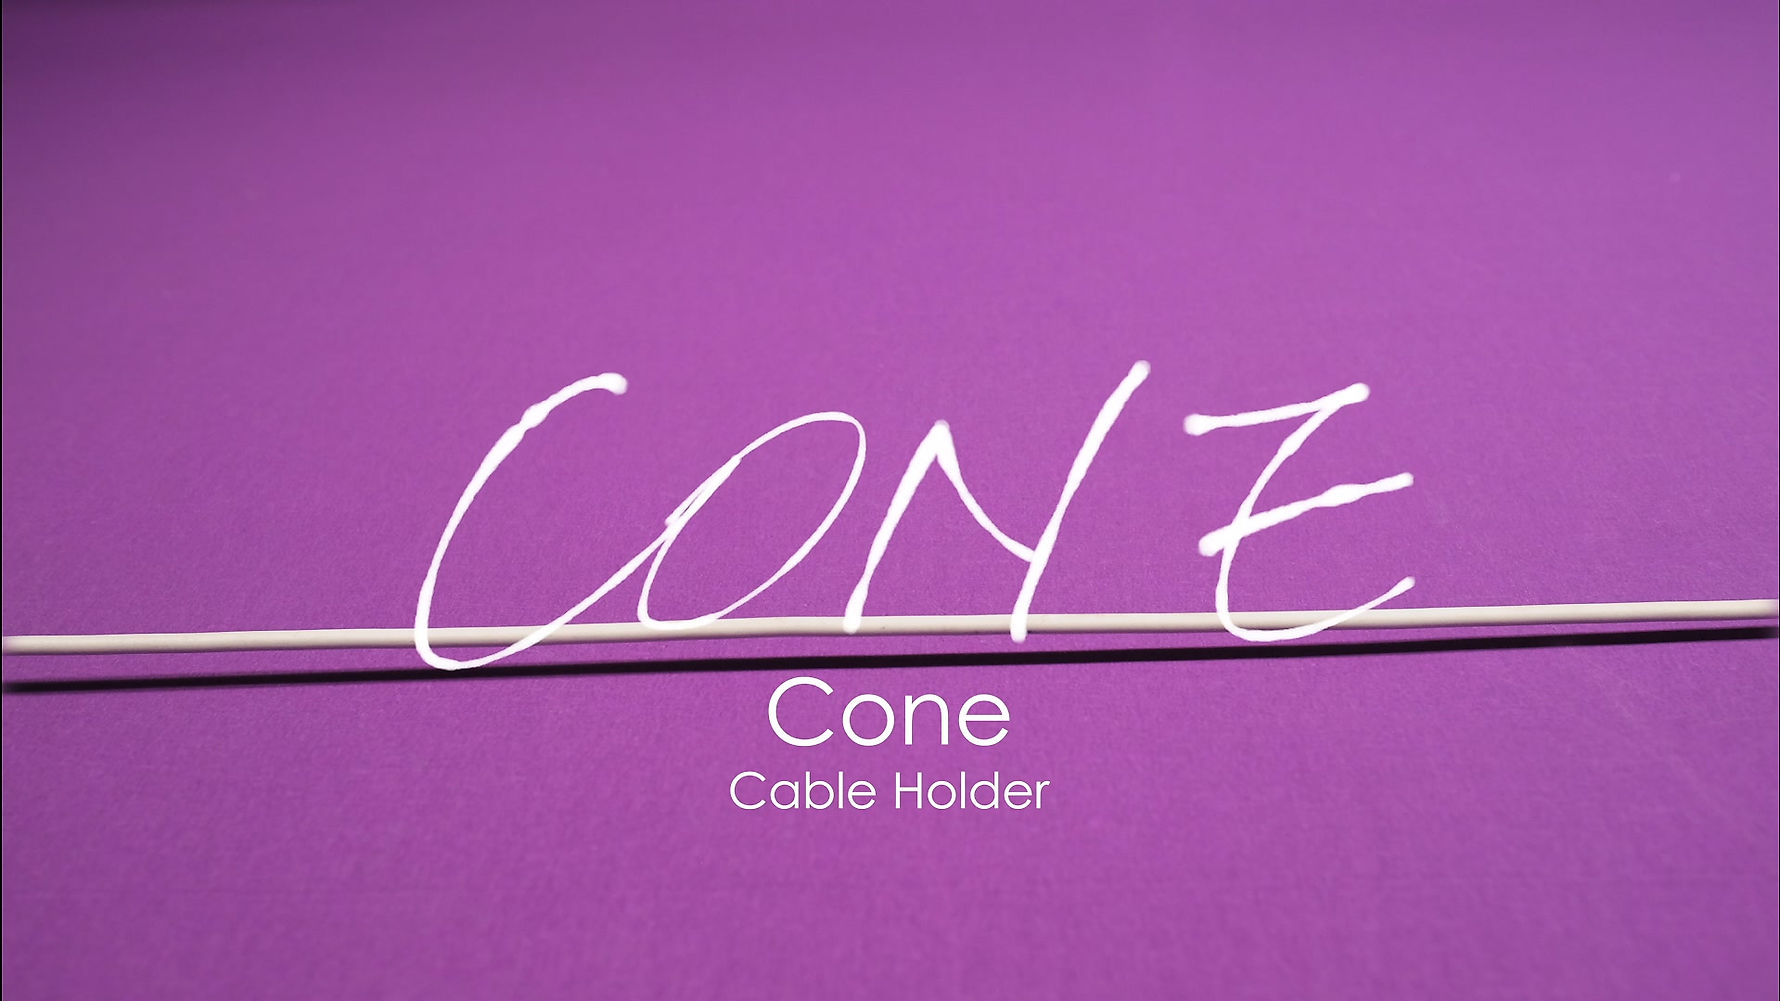 CONE_Cable Holder